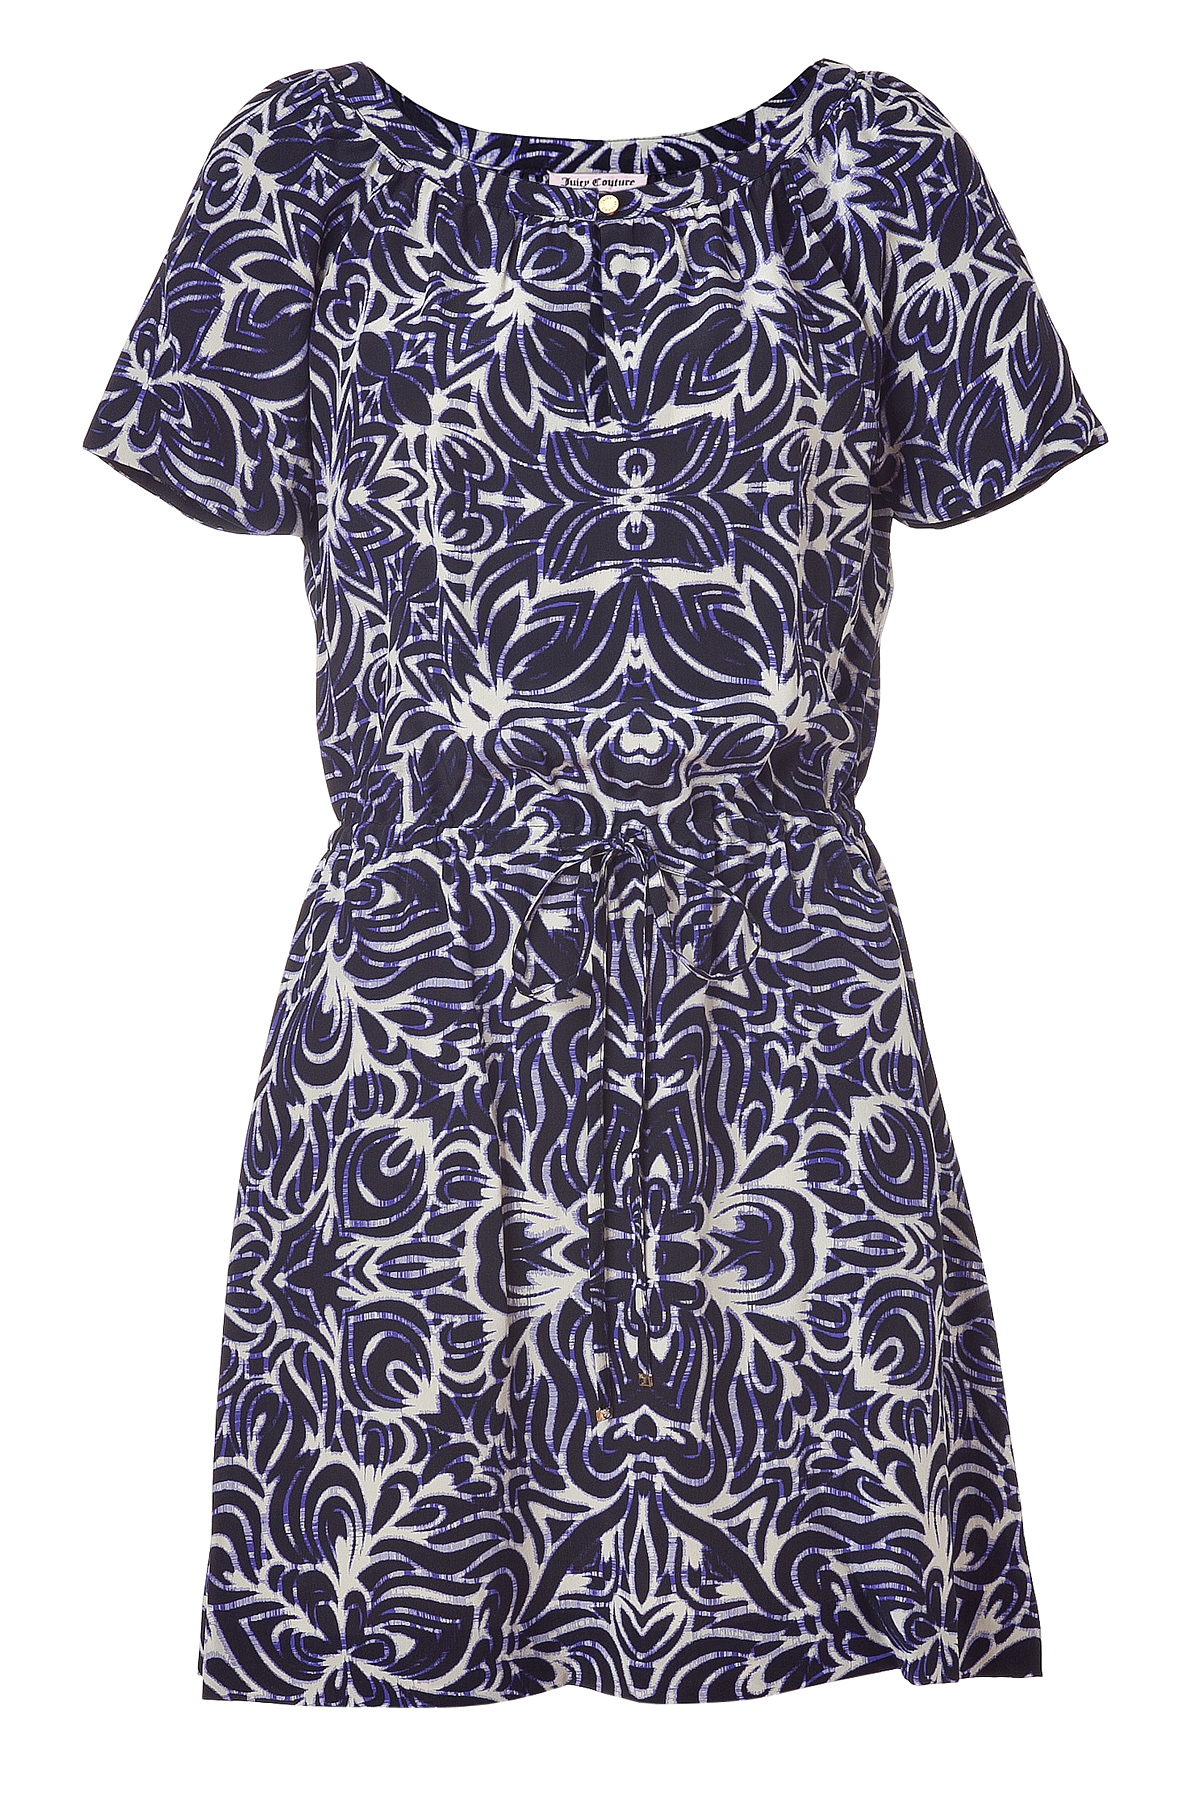 Lyst - Juicy Couture Indigo Ikat Tile Printed Silk Dress in Blue